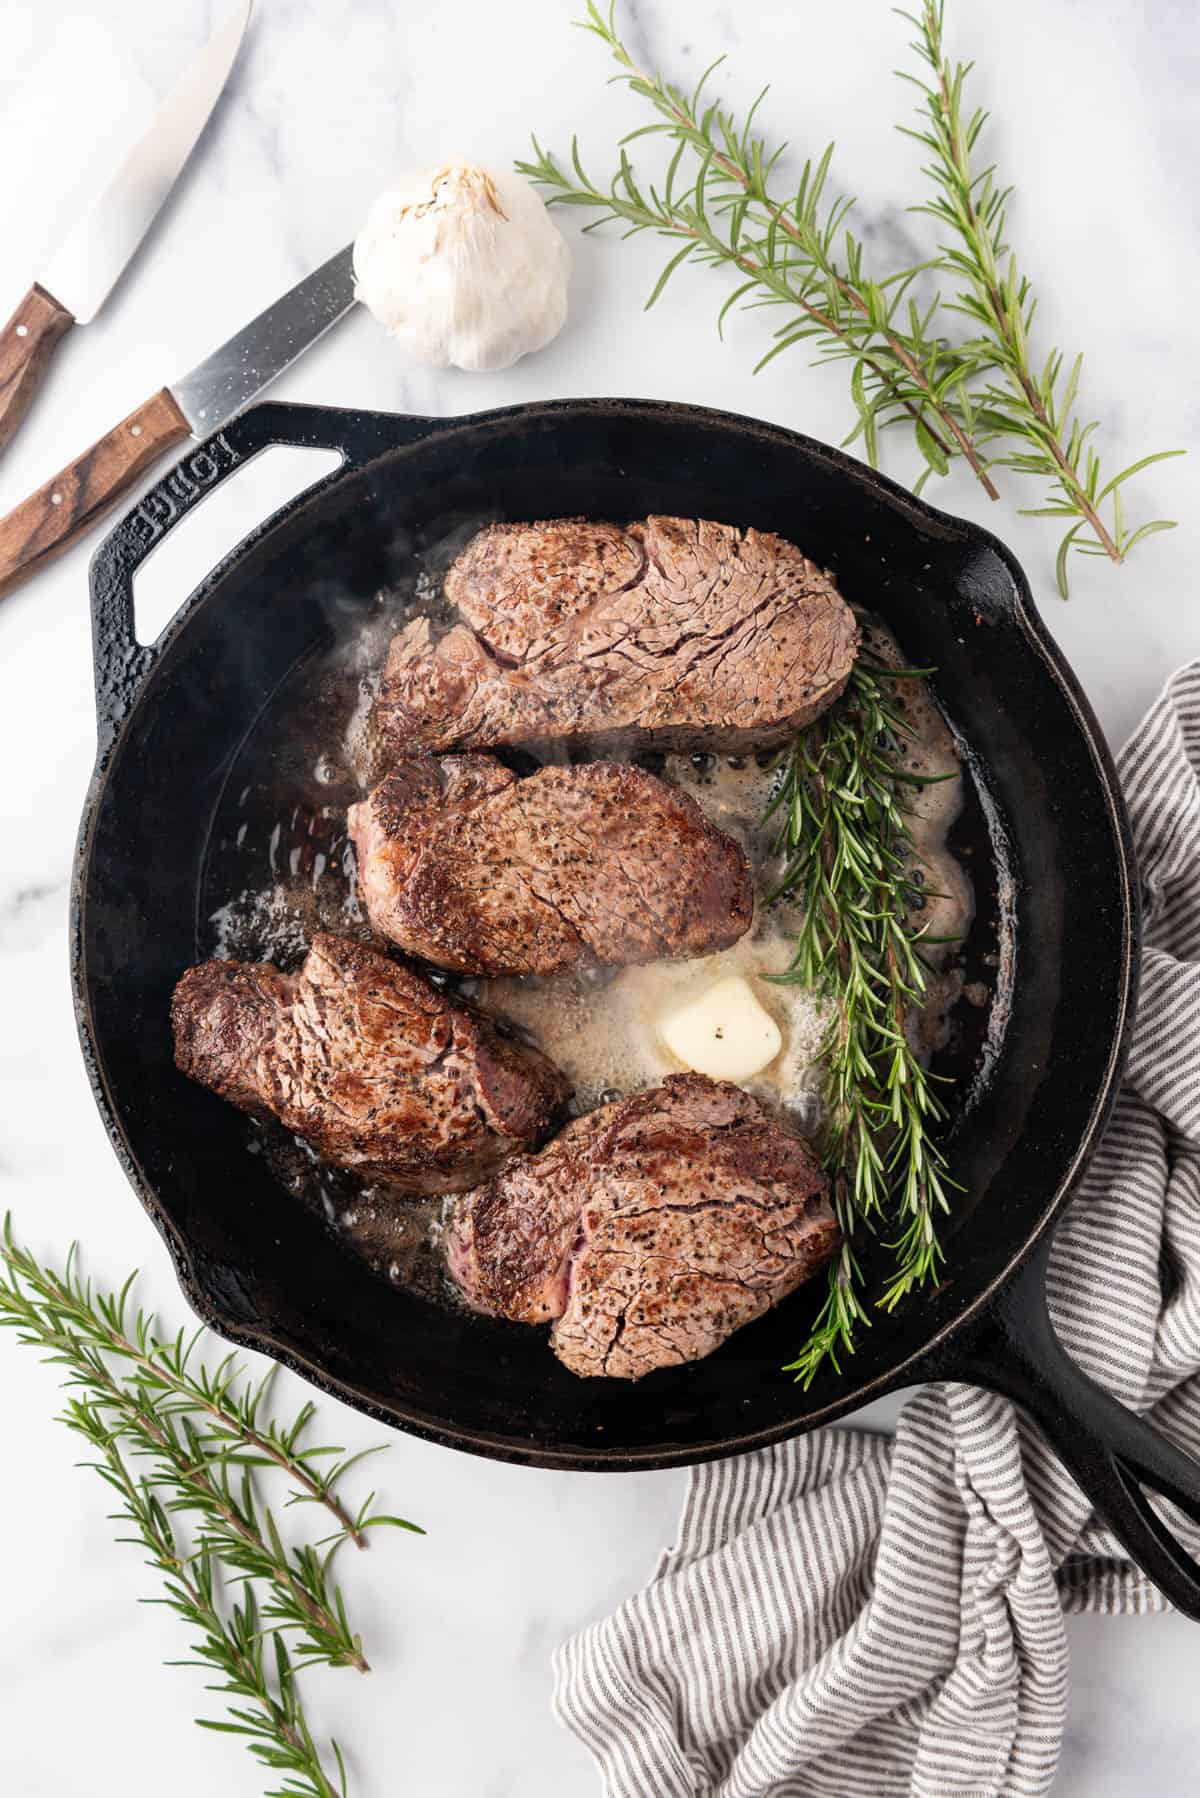 Adding butter and fresh rosemary to a cast iron skillet with filet mignon in it to finish the filet mignon.